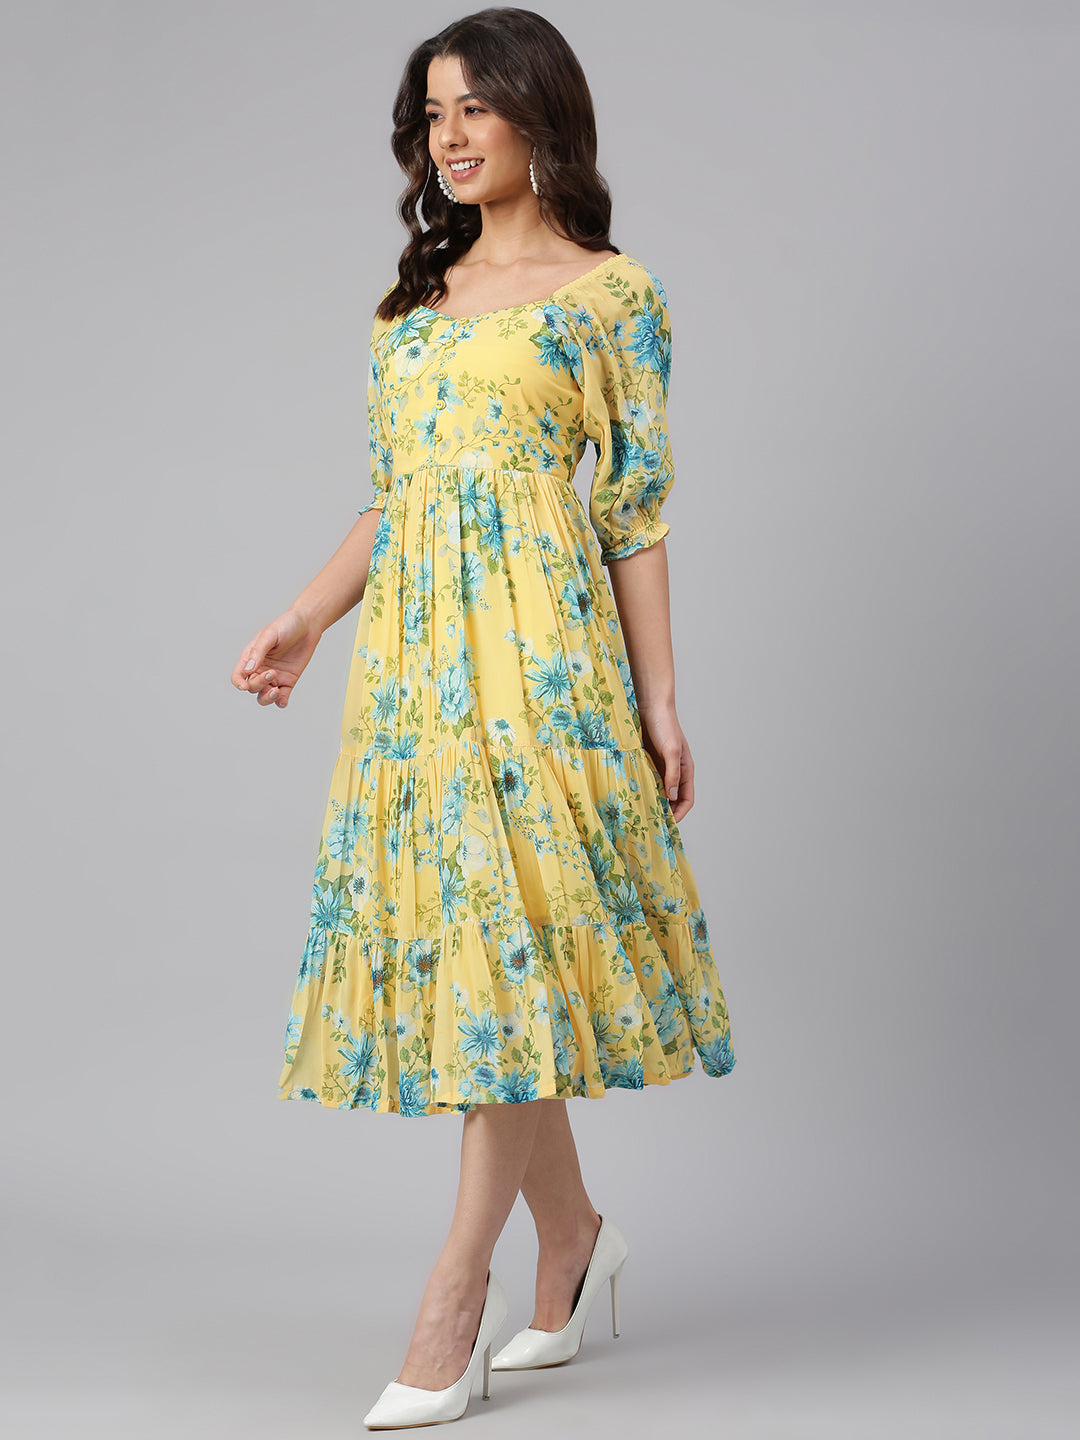 Buy FASHION QUEEN Western Dresses for Women Green Floral Print Mandarin  Collar with 3/4 Sleeves Georgette Fabric Maxi Length Dress (X-Small) at  Amazon.in